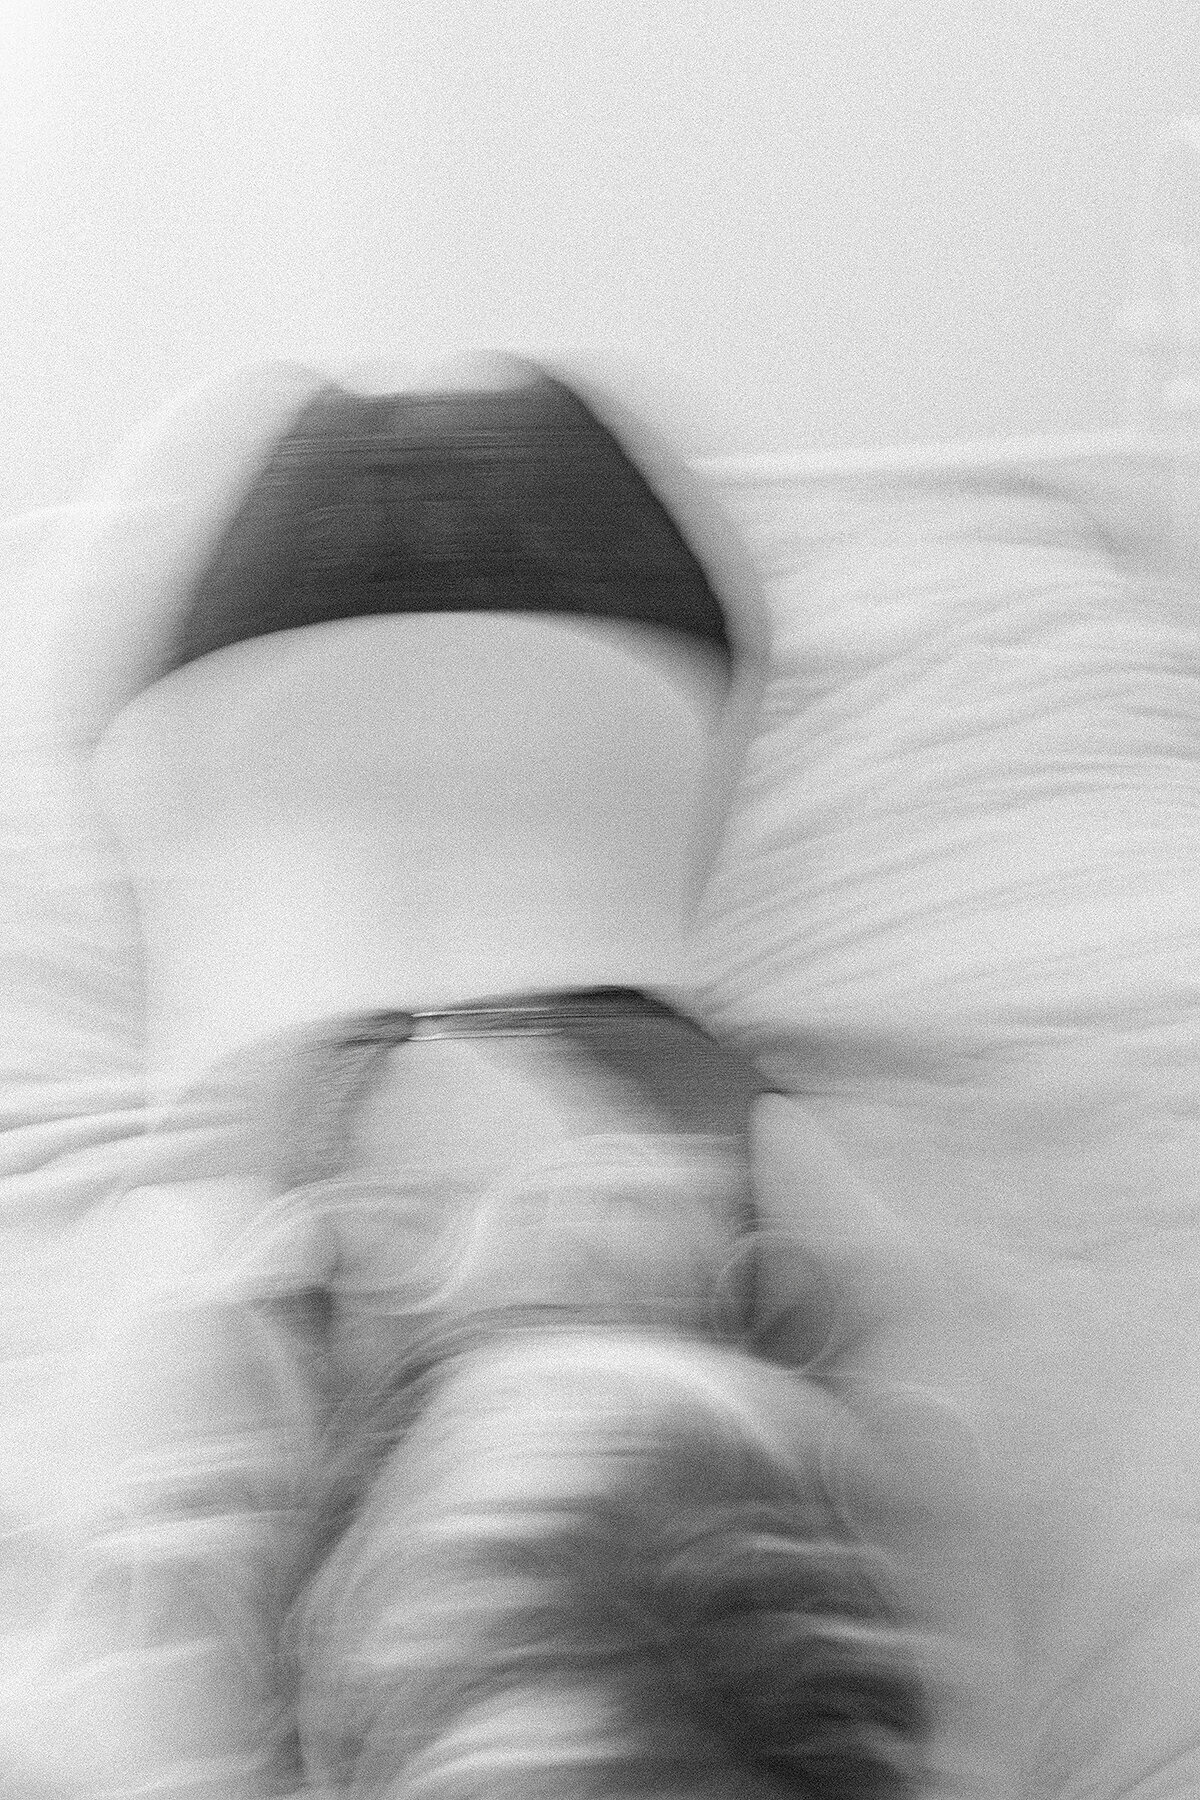 A blurred black and white photo of a woman leaning on a bed while wearing black lace lingerie.